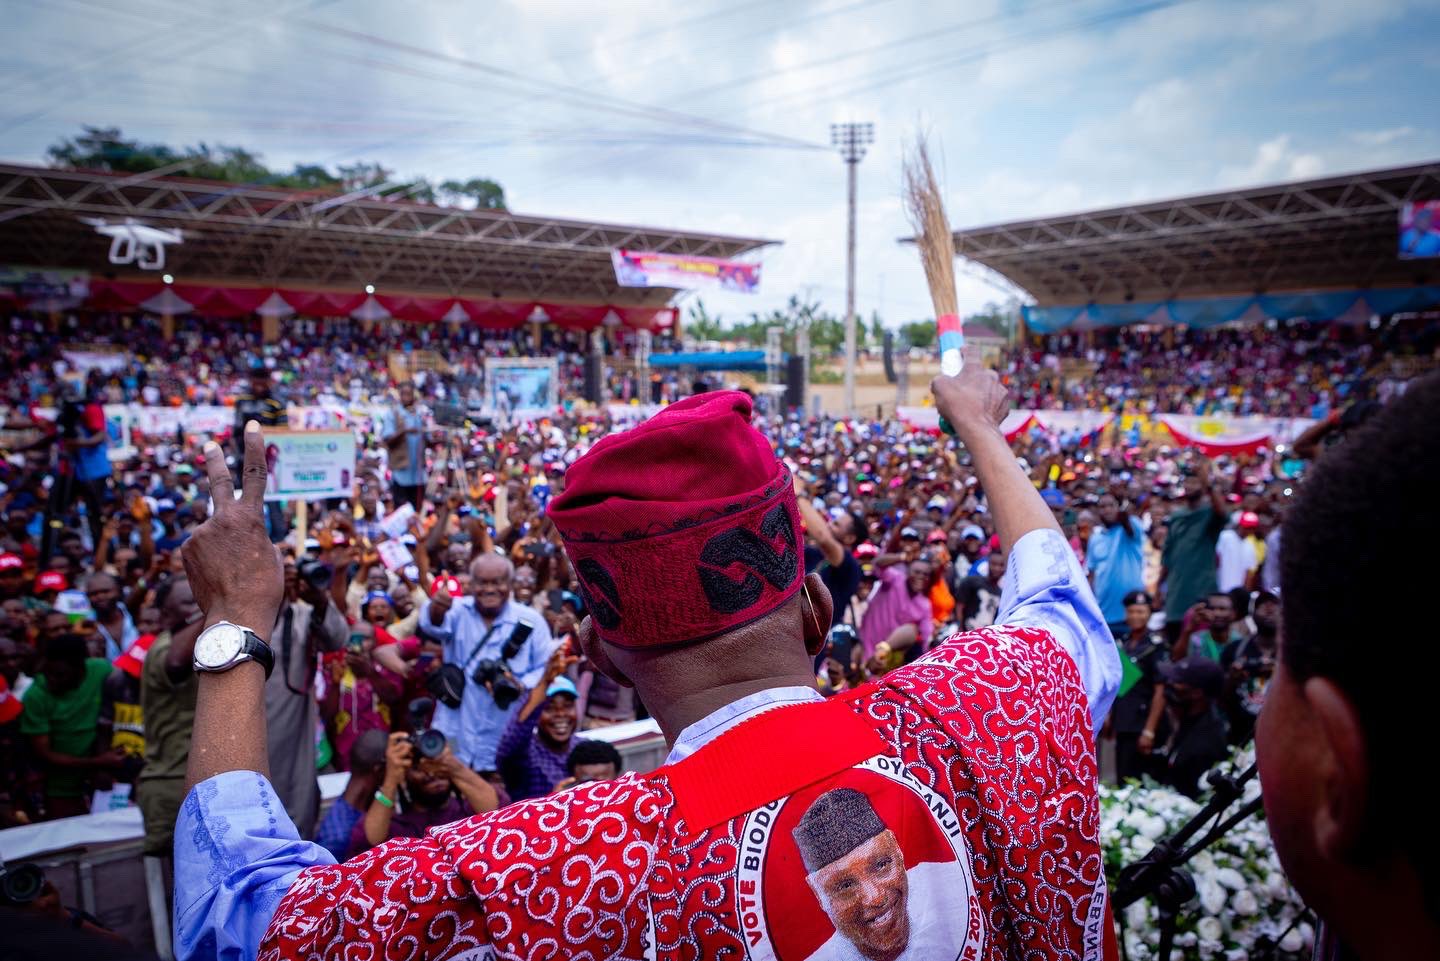 Latest Political News In Nigeria For Today, Wednesday, 15th June, 2022